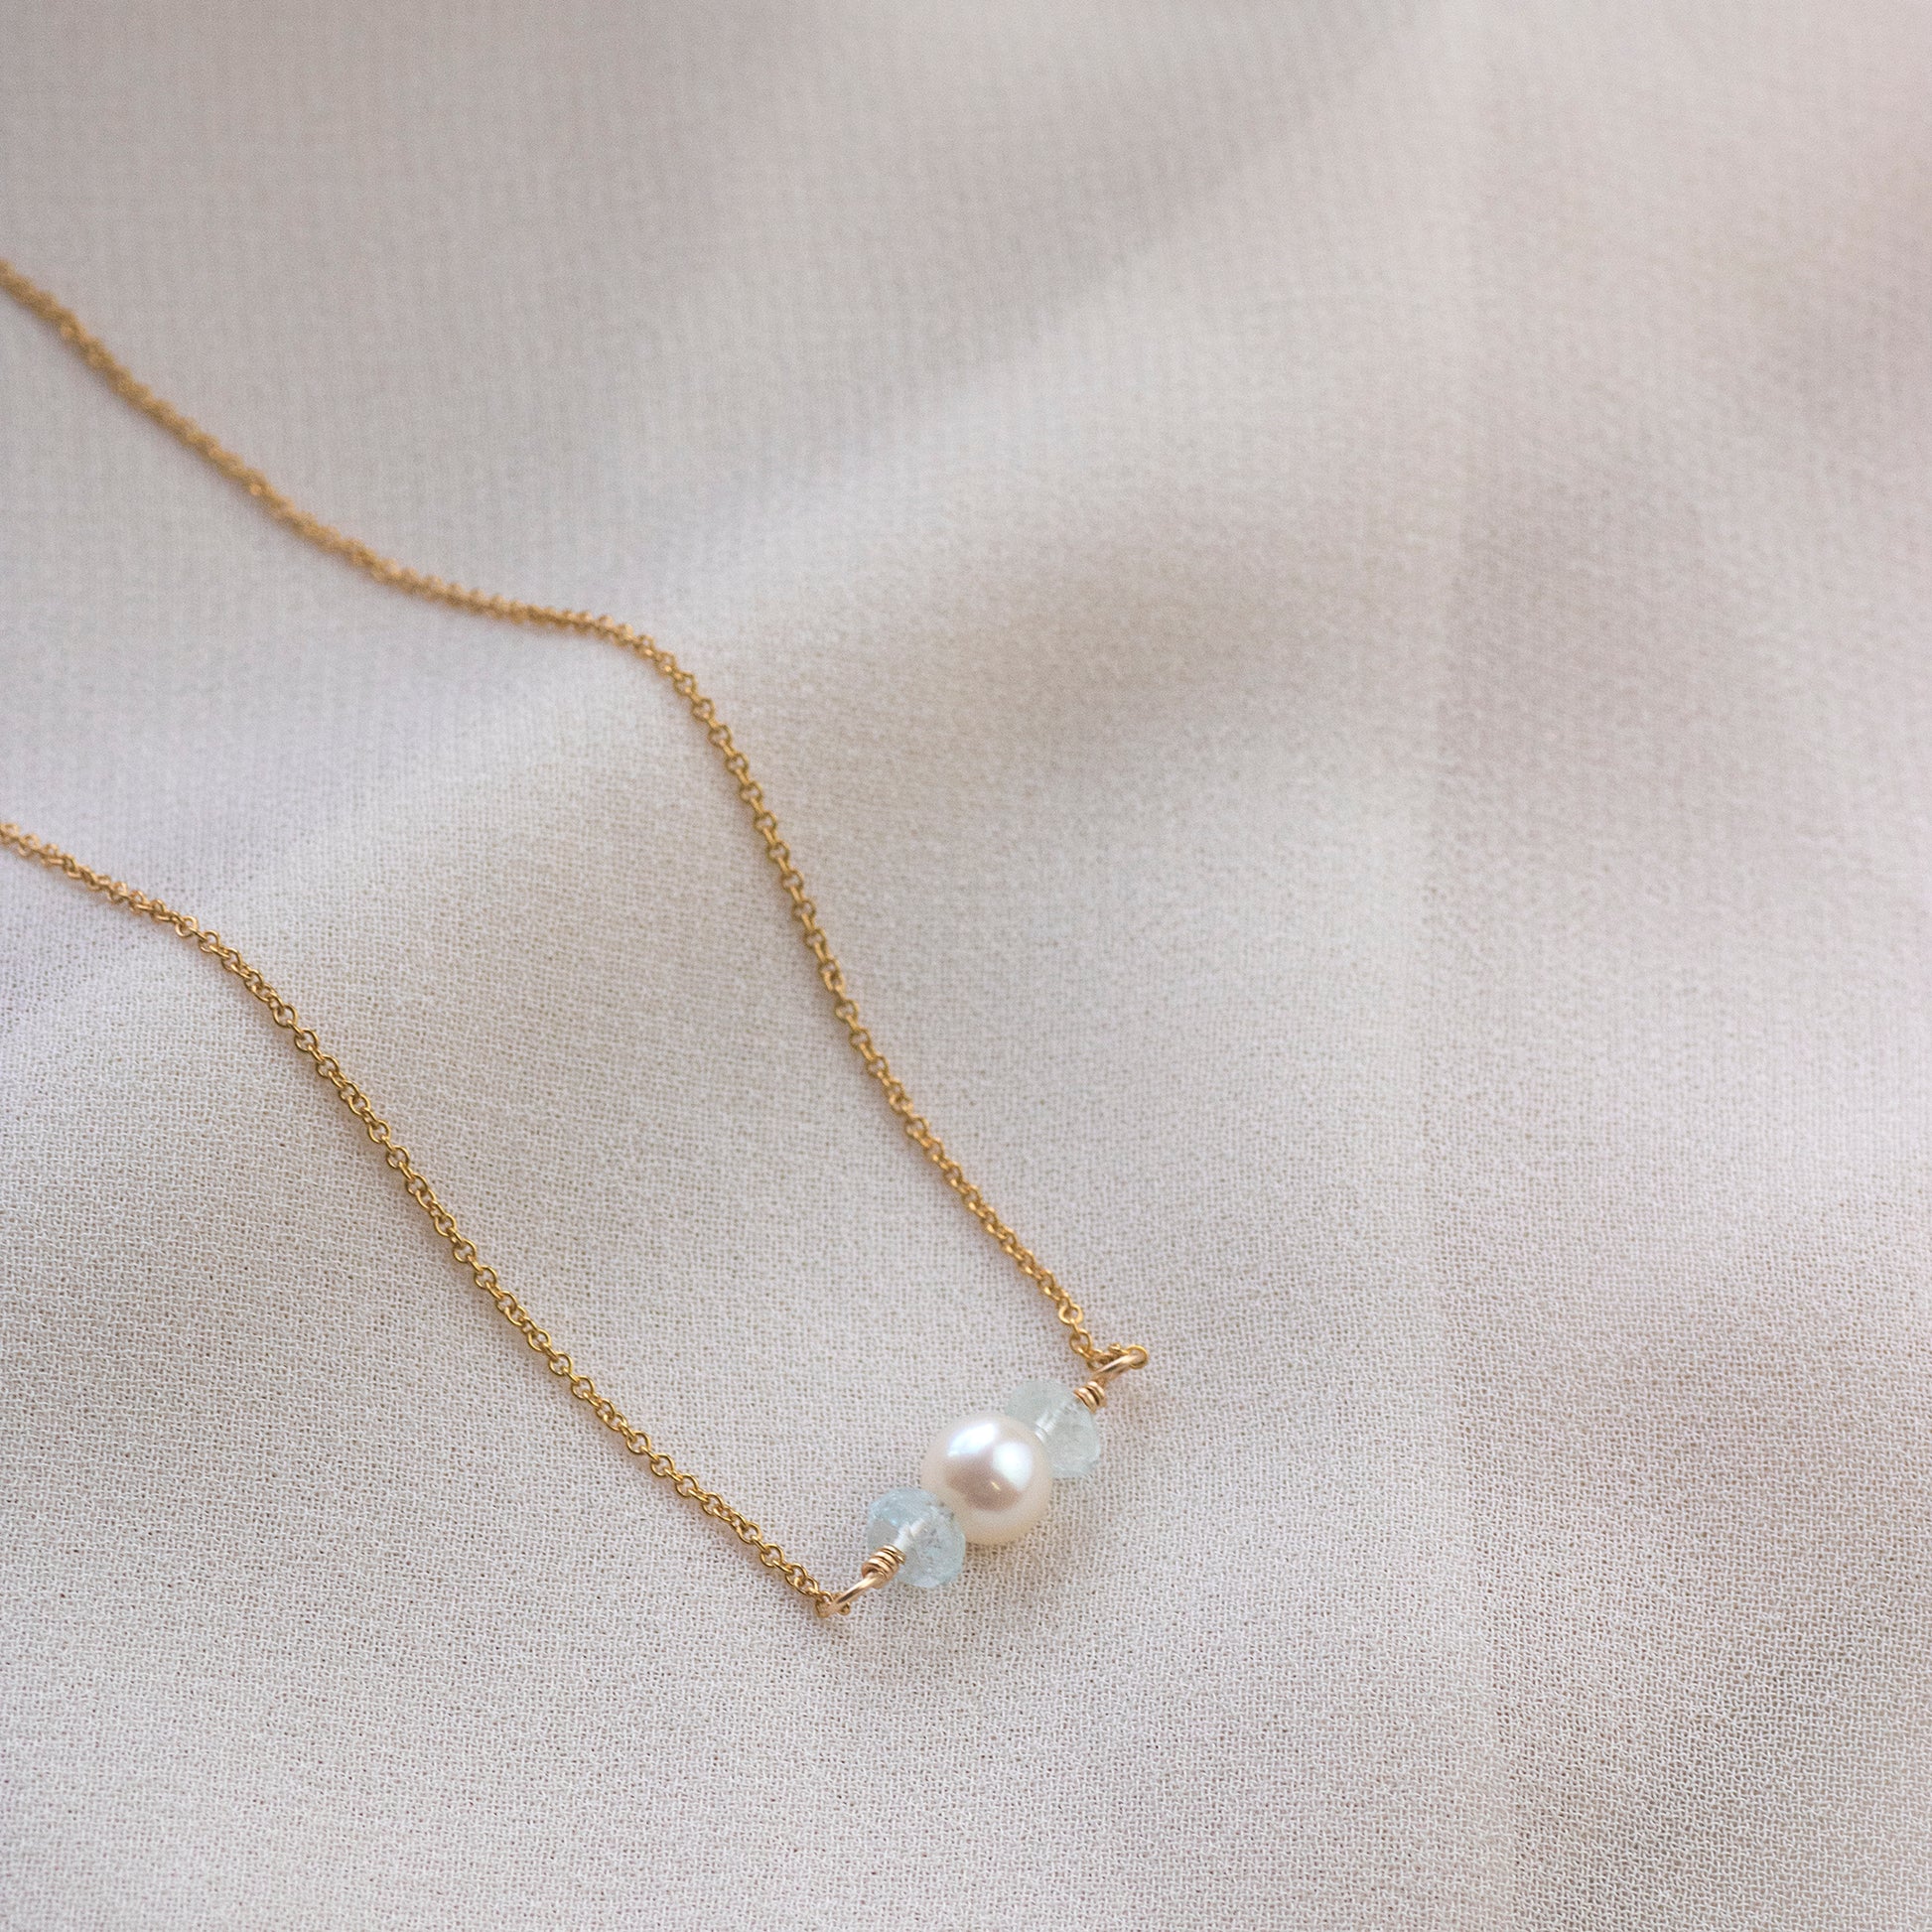 Wedding Day Gift for Bride - Blue Topaz and Pearl Necklace